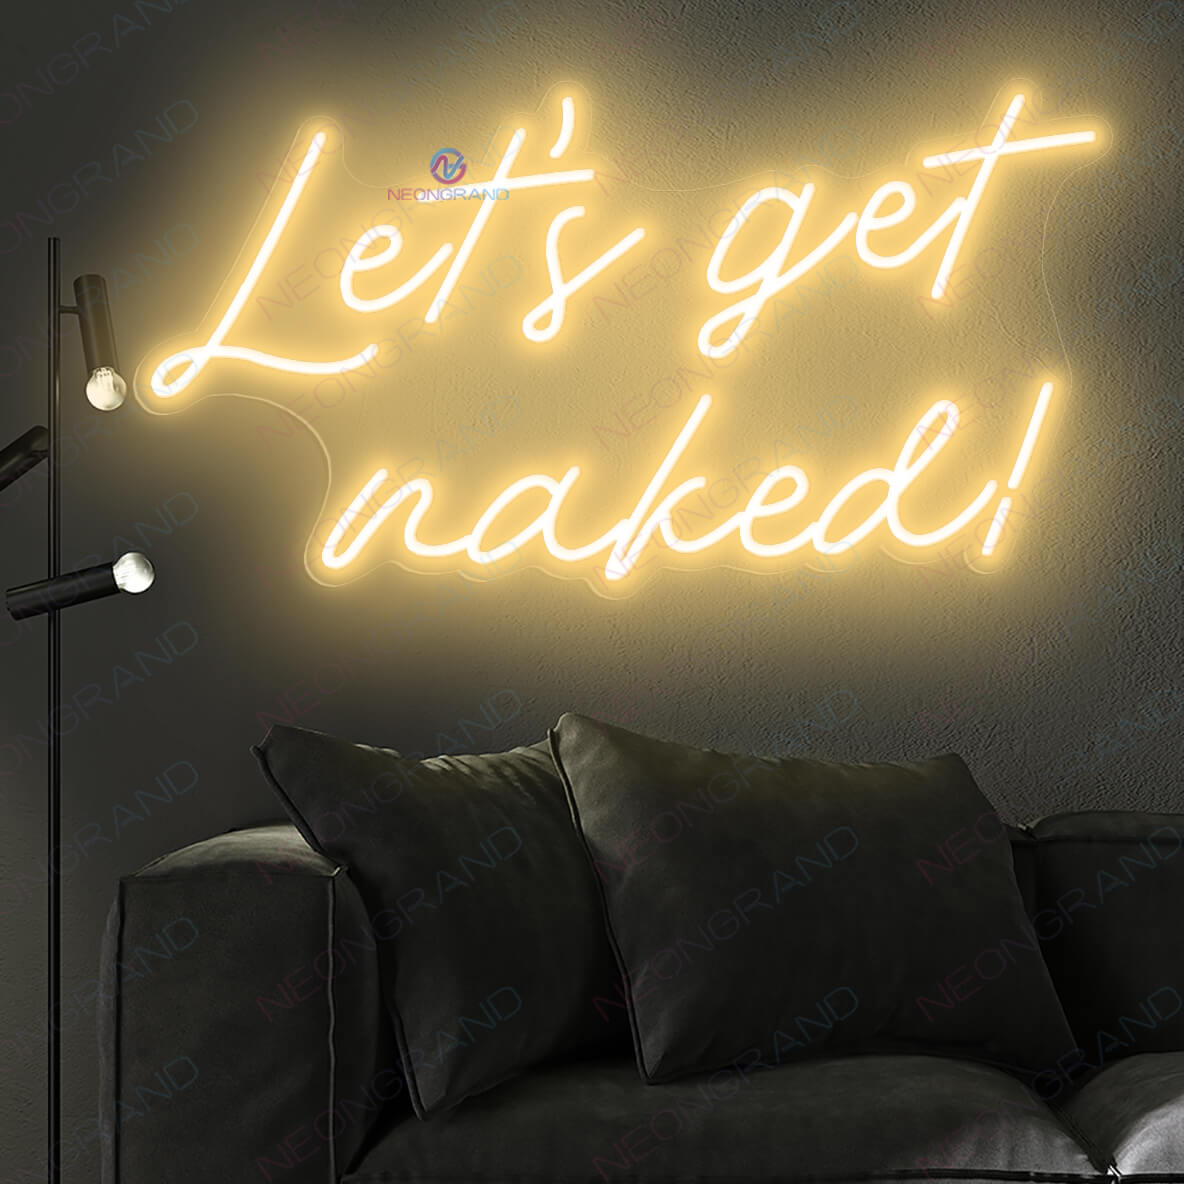 Let's Get Naked Neon Sign Sexy Led Light gold yellow